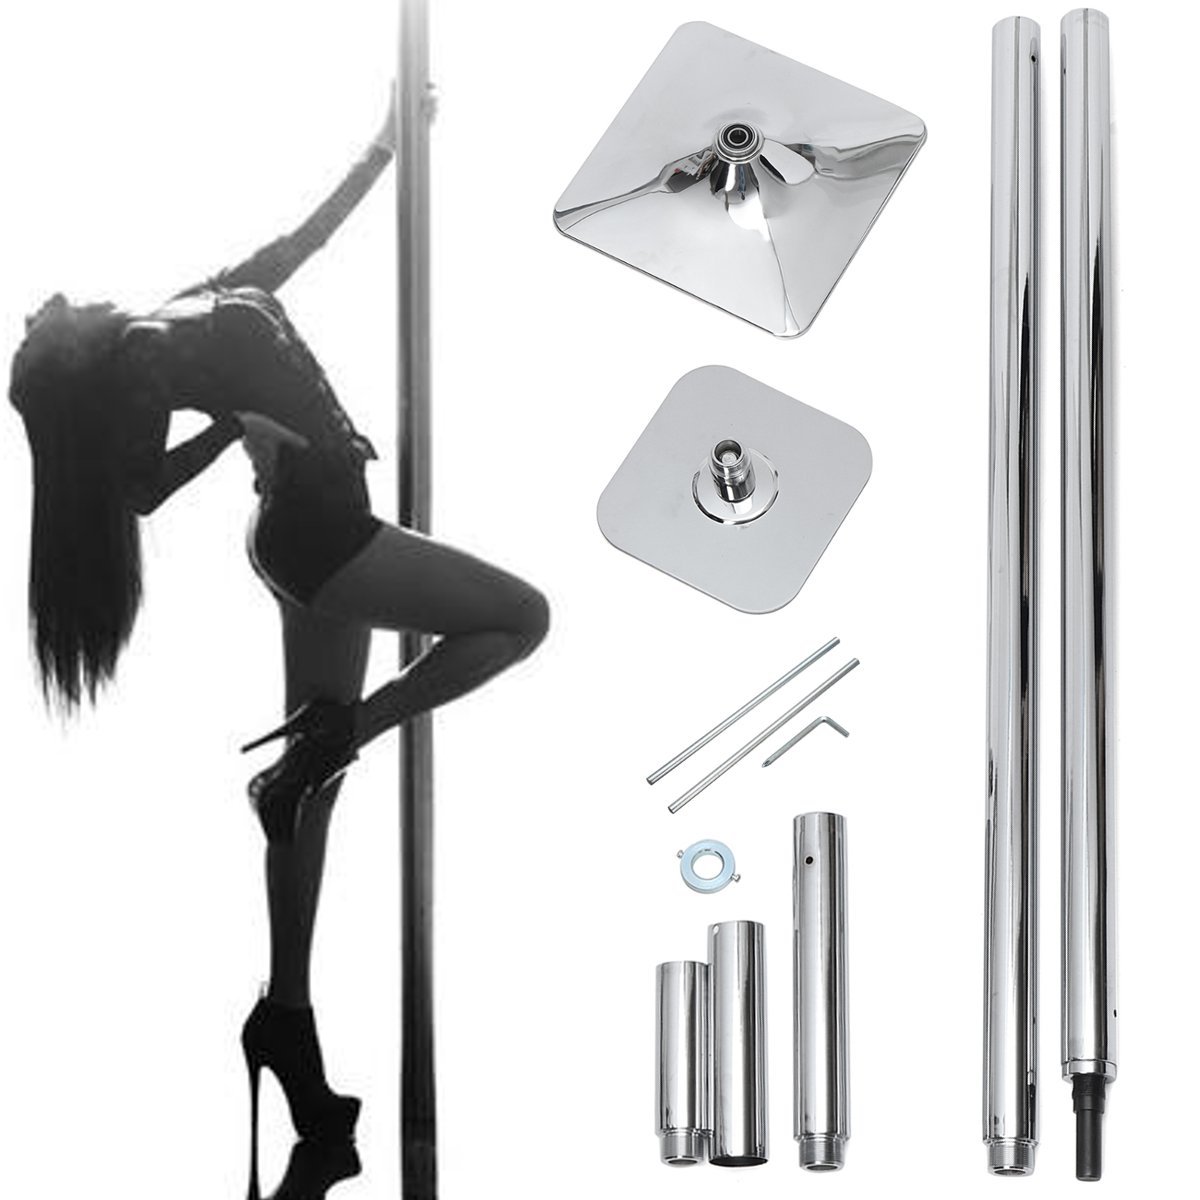 45mm-Professional-Spinning-Pole-Dancing-Kit-Home-Gym-Sporting-Fitness-Equipments-1661232